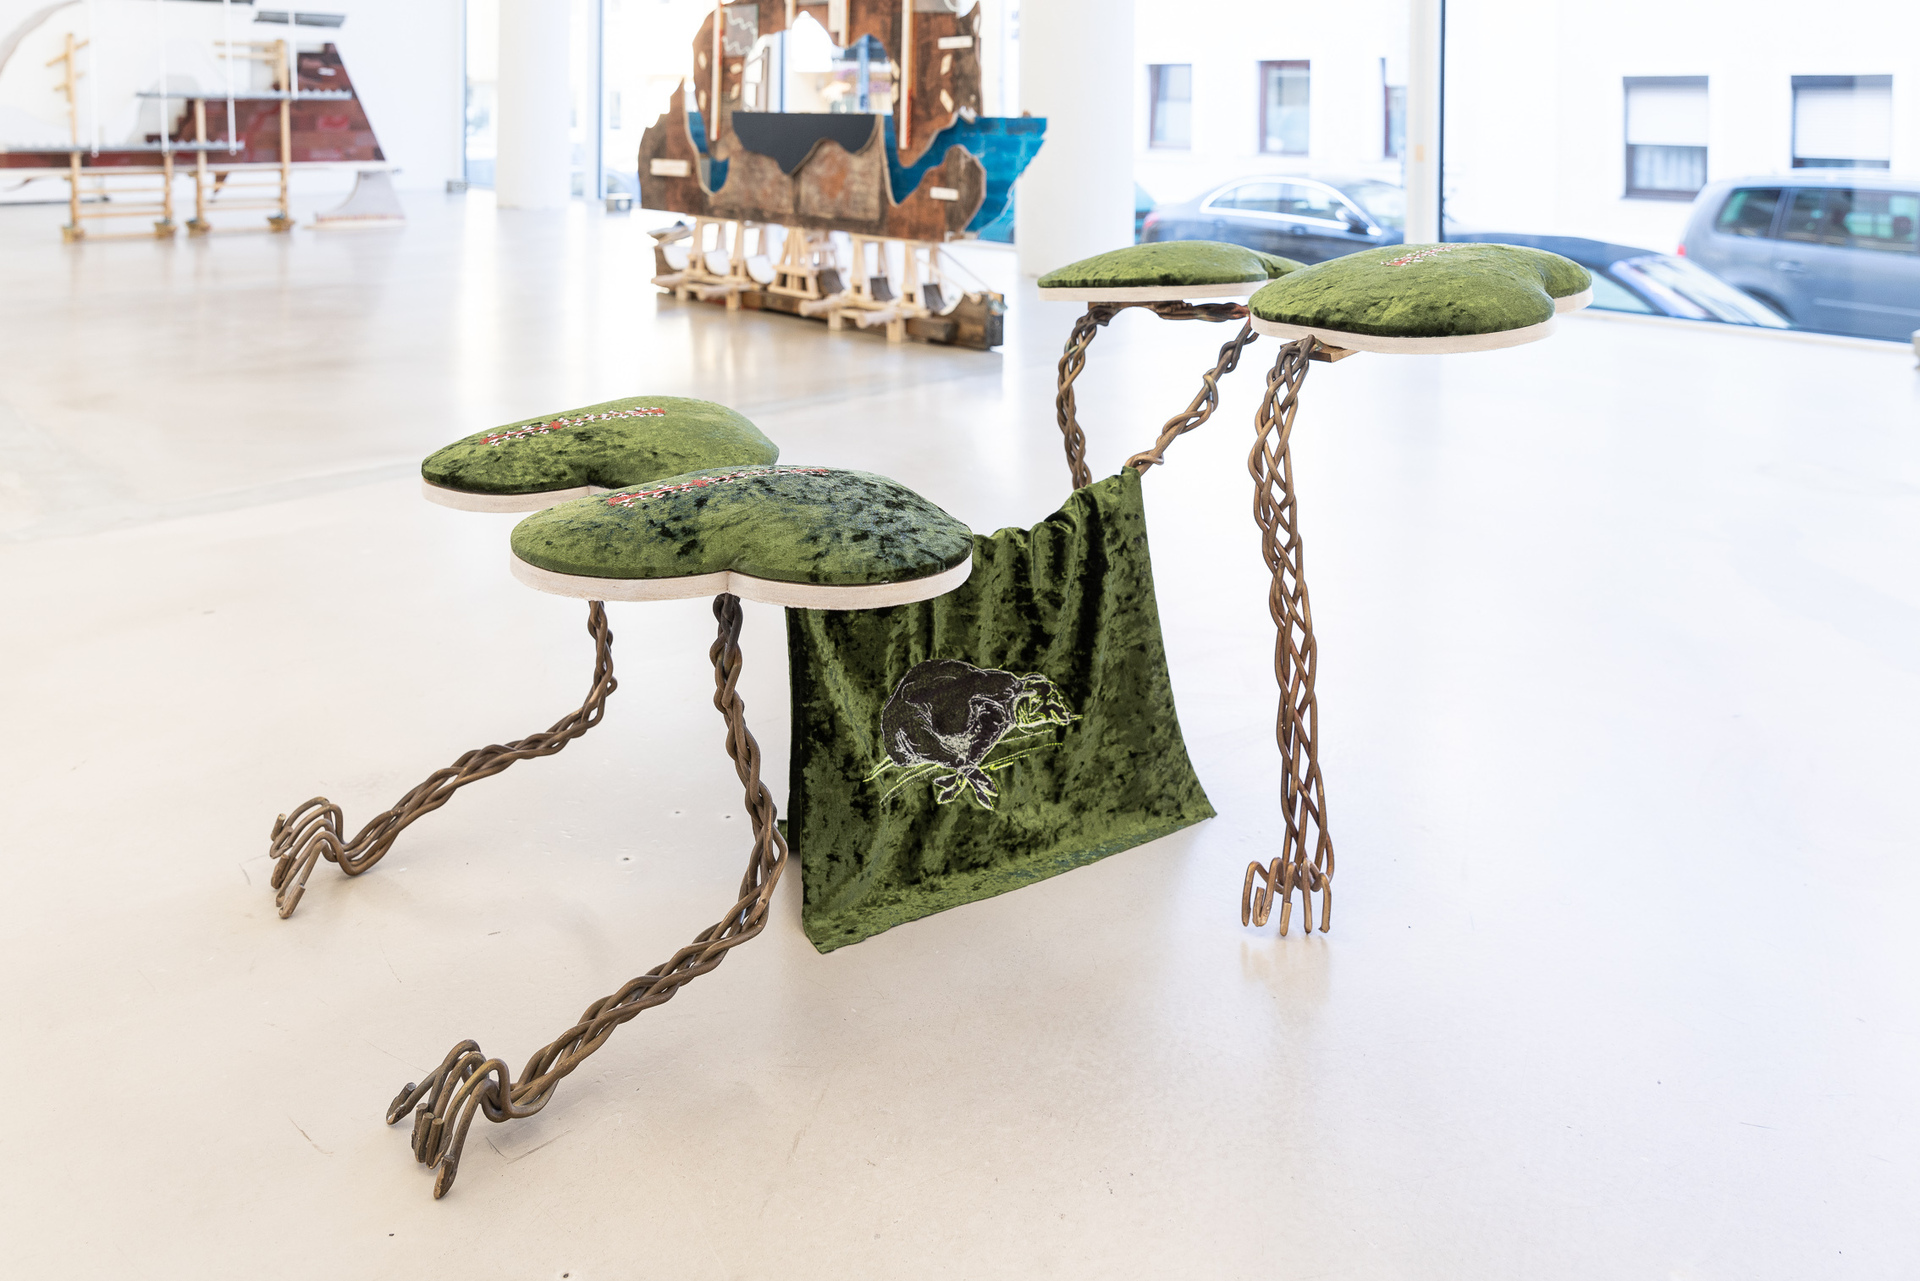 Brittni Ann Harvey - Lamb of God (bowing robot dog), 2021, embroidered polyester, plywood, polypill, bronze, 50.2 x 105.1 x 60 cm